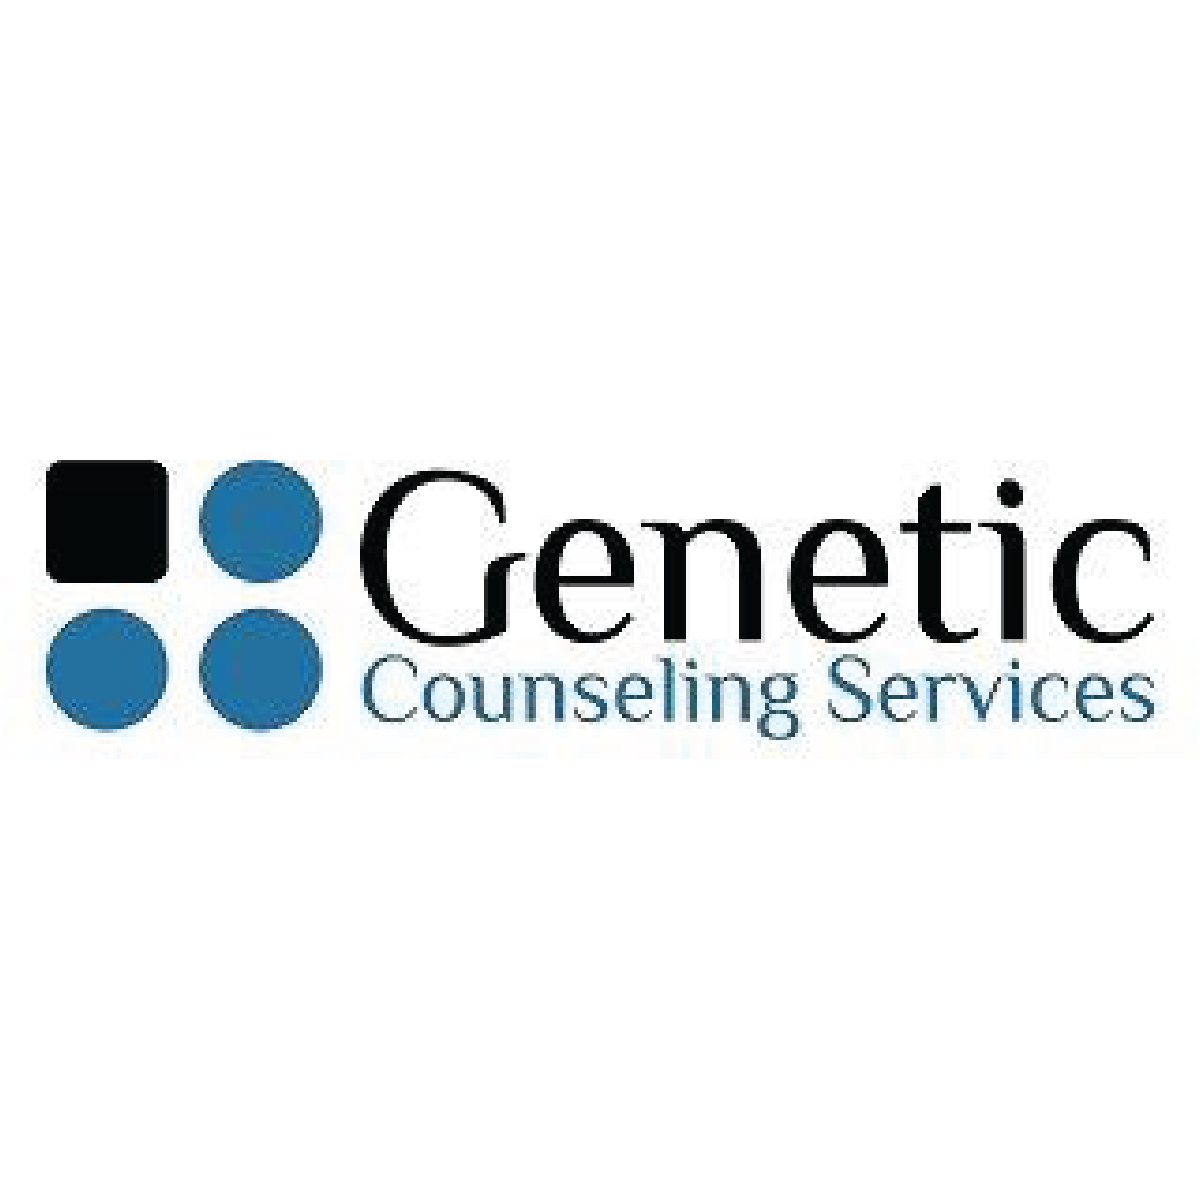 Genetic Counseling Services logo